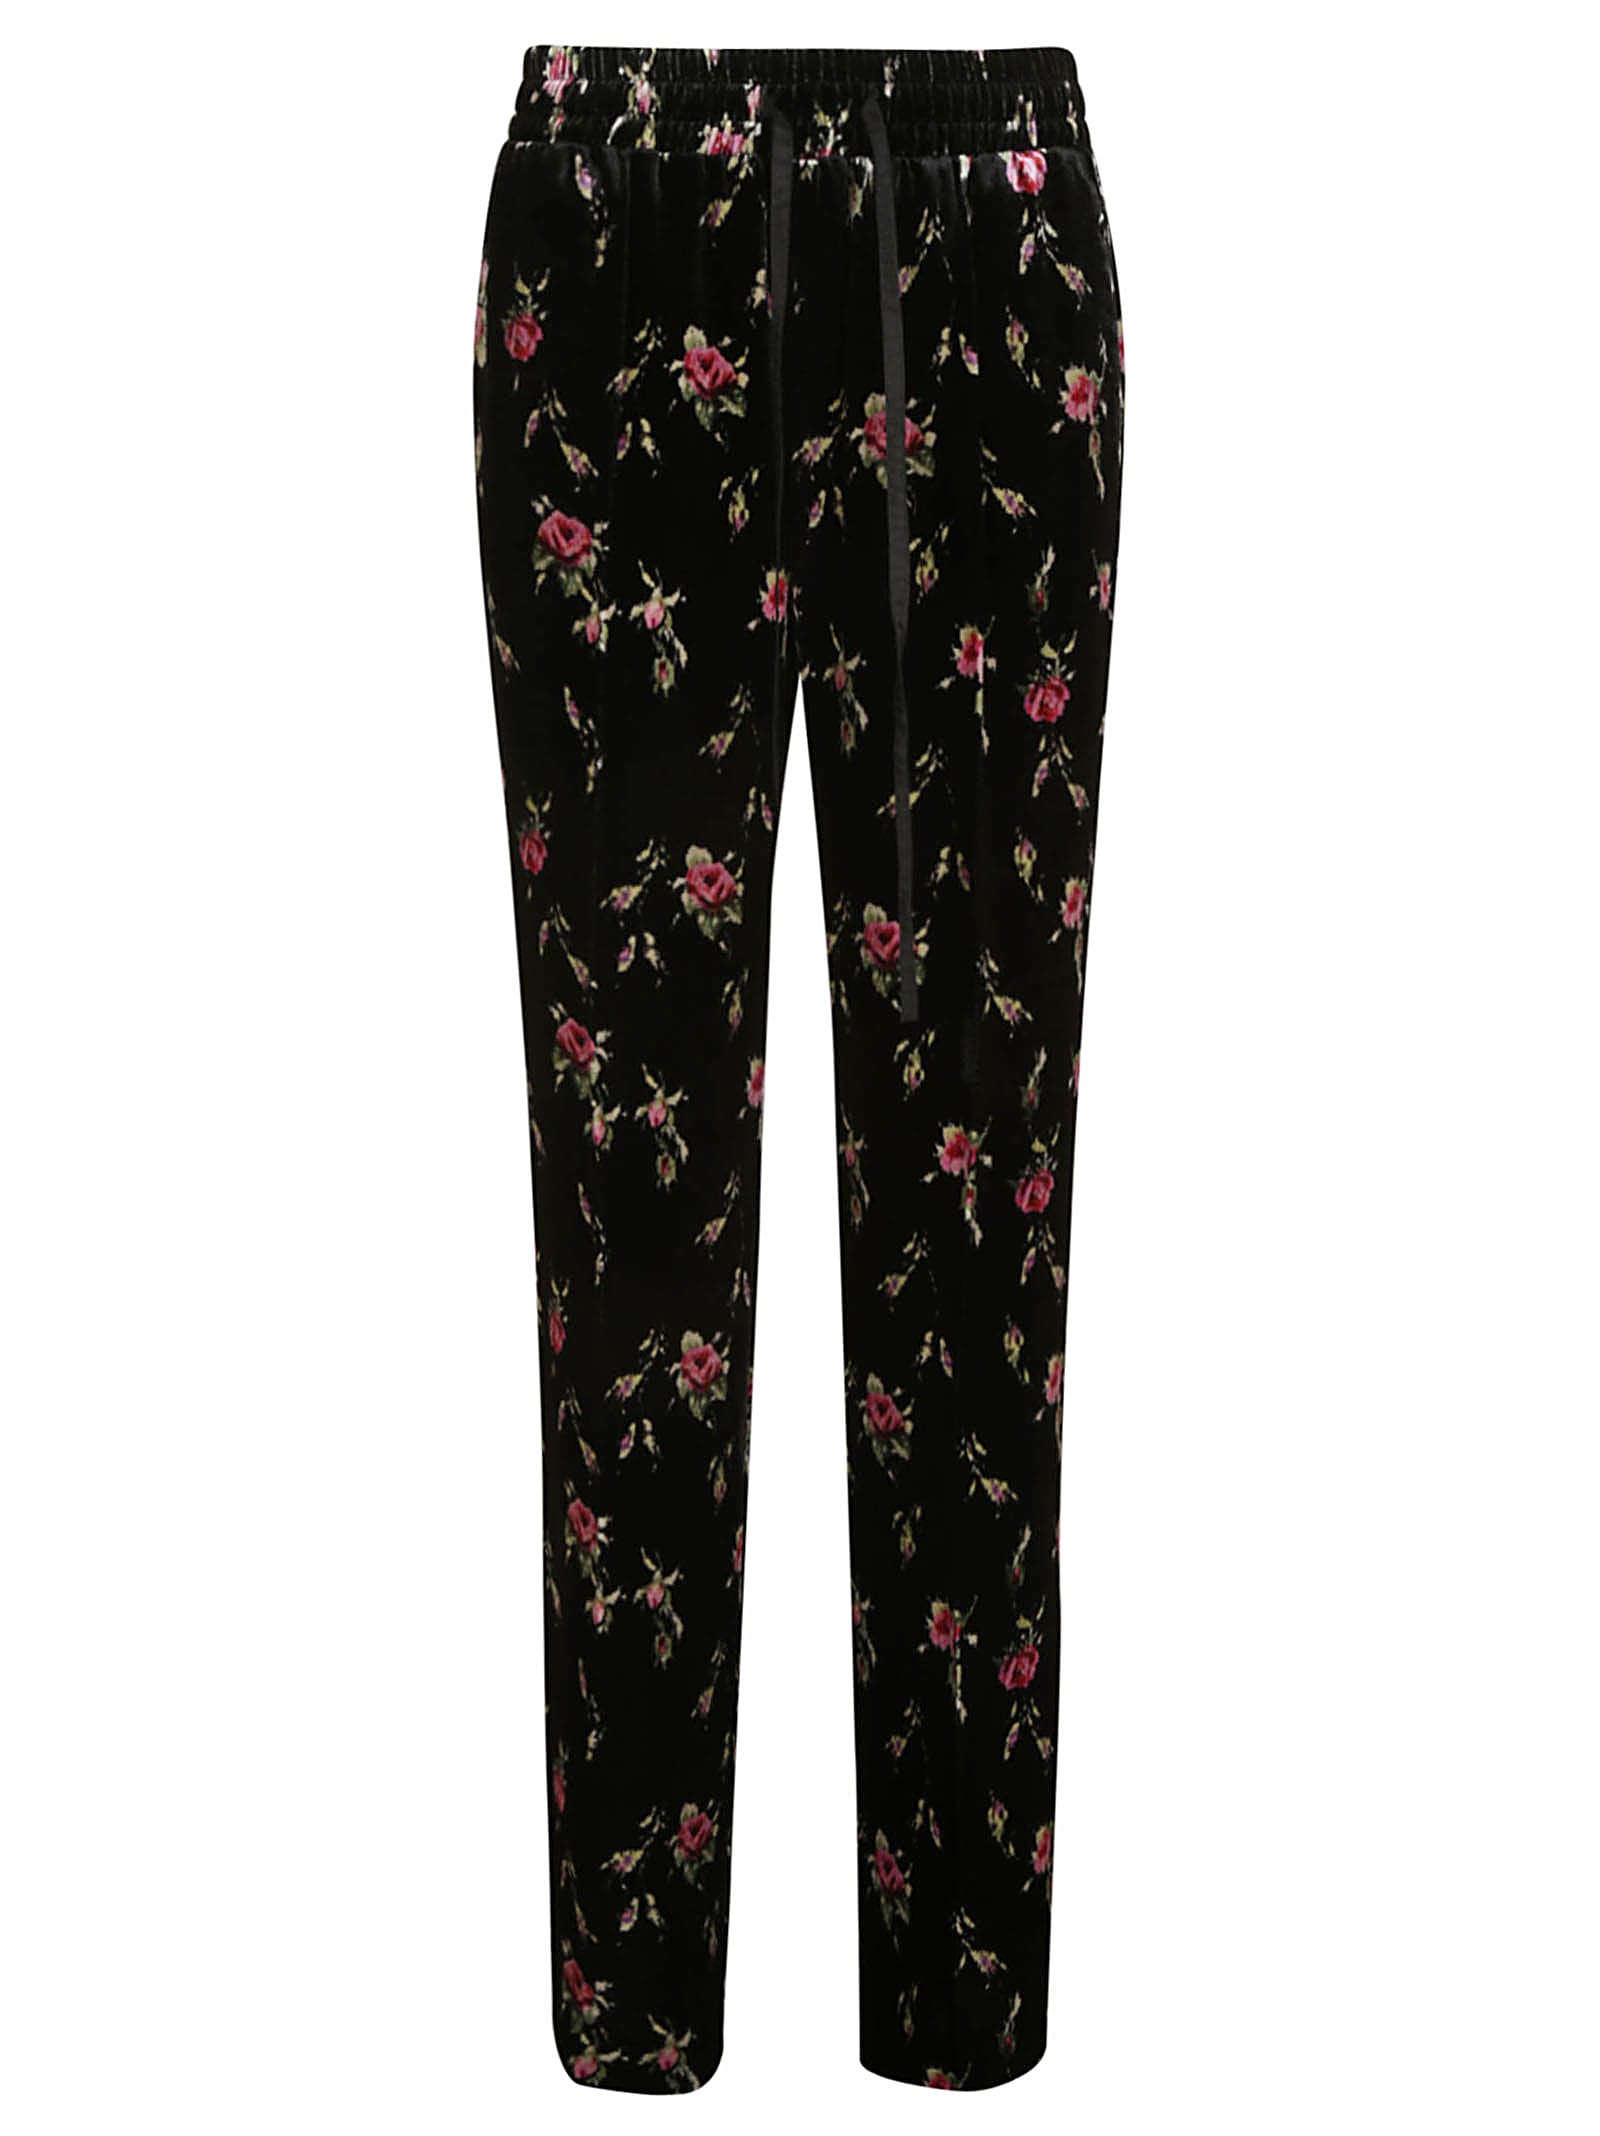 RED Valentino Floral Print Drawstring Waist Trousers